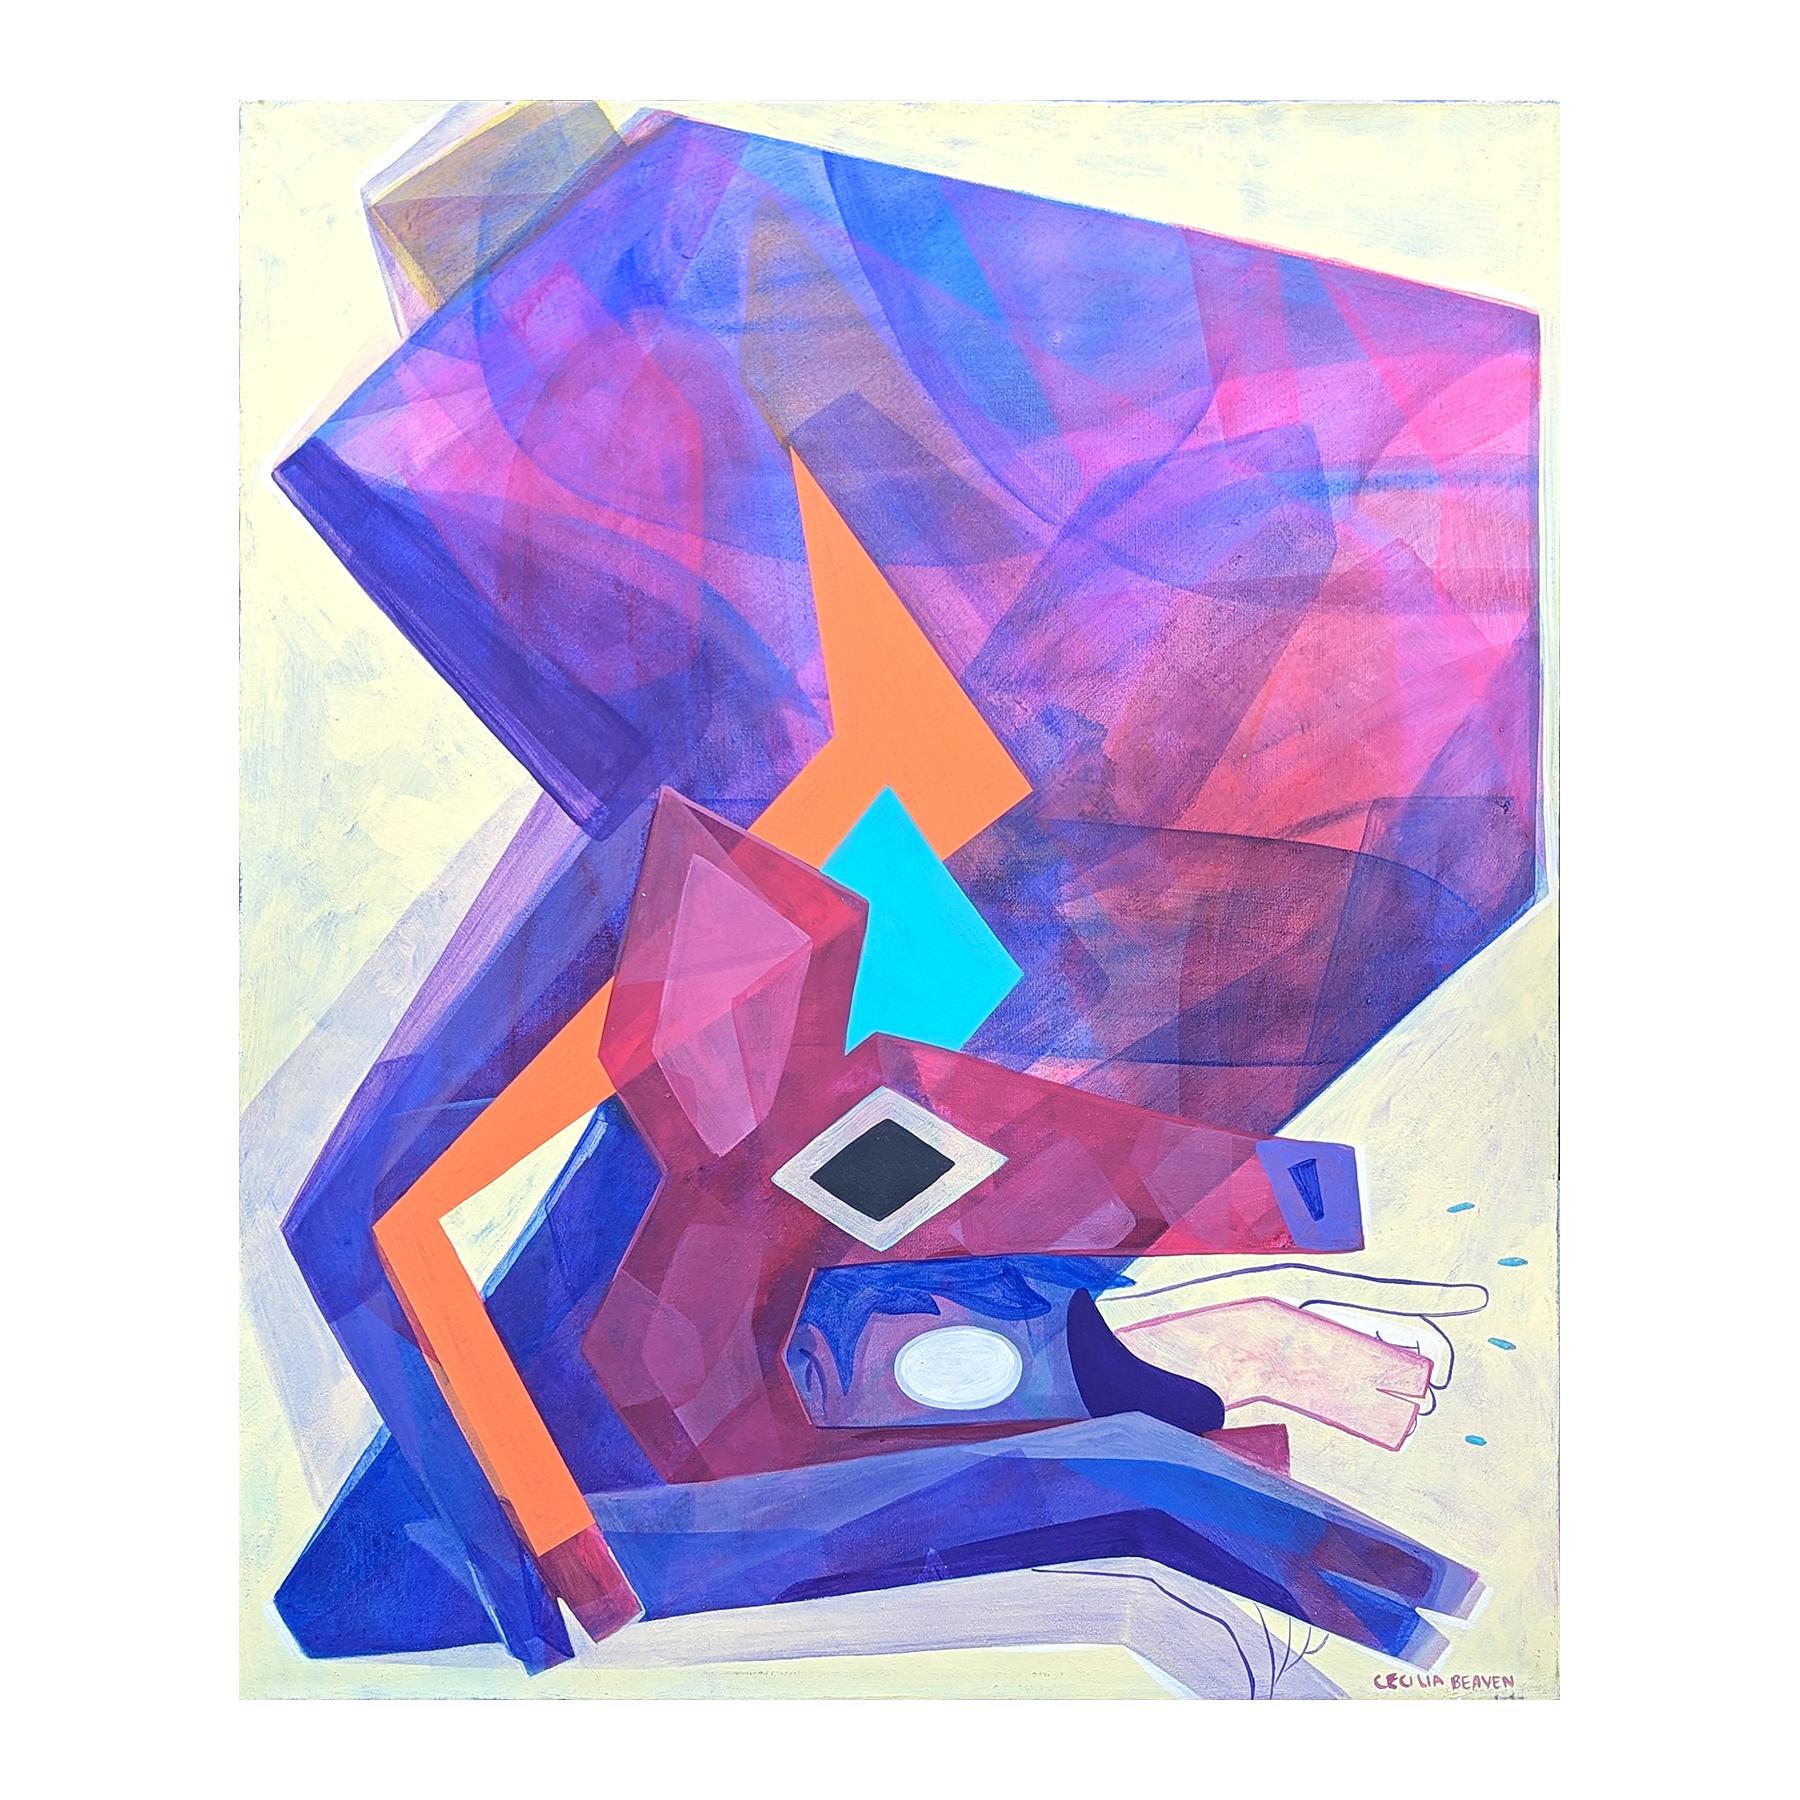 Contemporary orange, purple, and blue toned abstract painting by Chicago-based artist Cecilia Beaven. The work features a contorted deer inspired figure. Cecilia Beaven draws upon her early life in Mexico City as well as her own personal